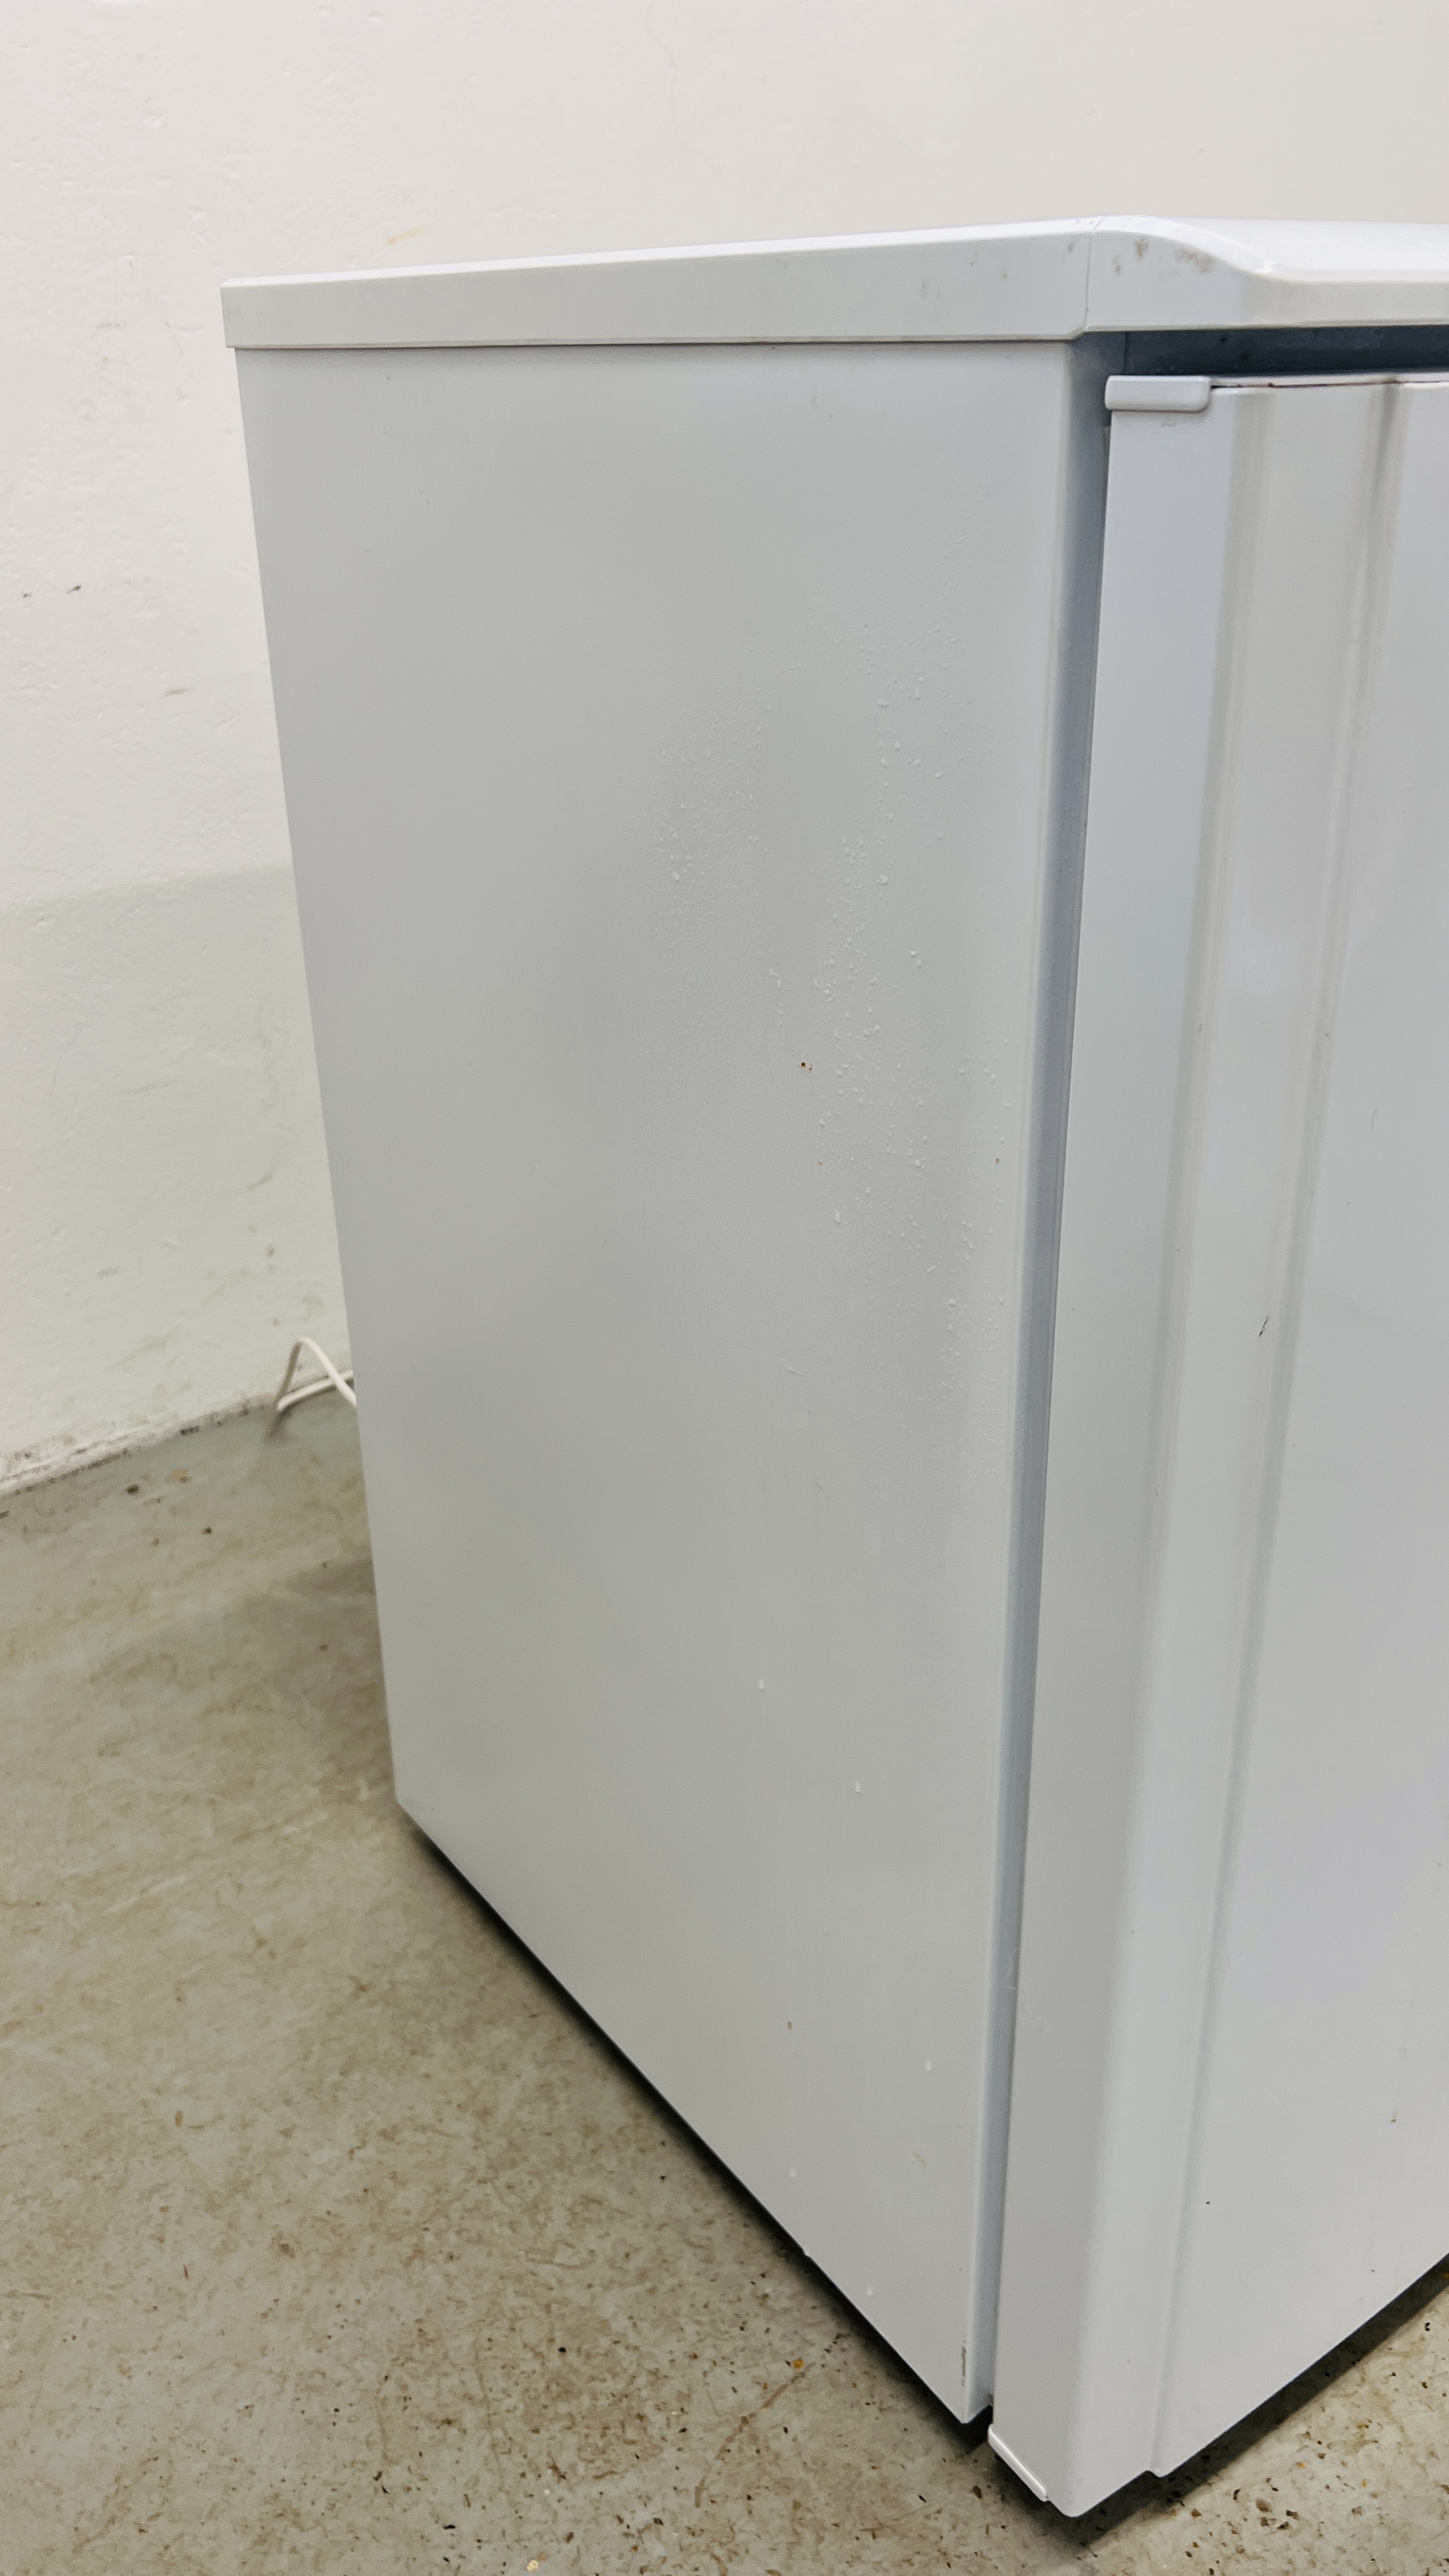 A HOTPOINT UNDER COUNTER FREEZER - SOLD AS SEEN. - Image 6 of 8